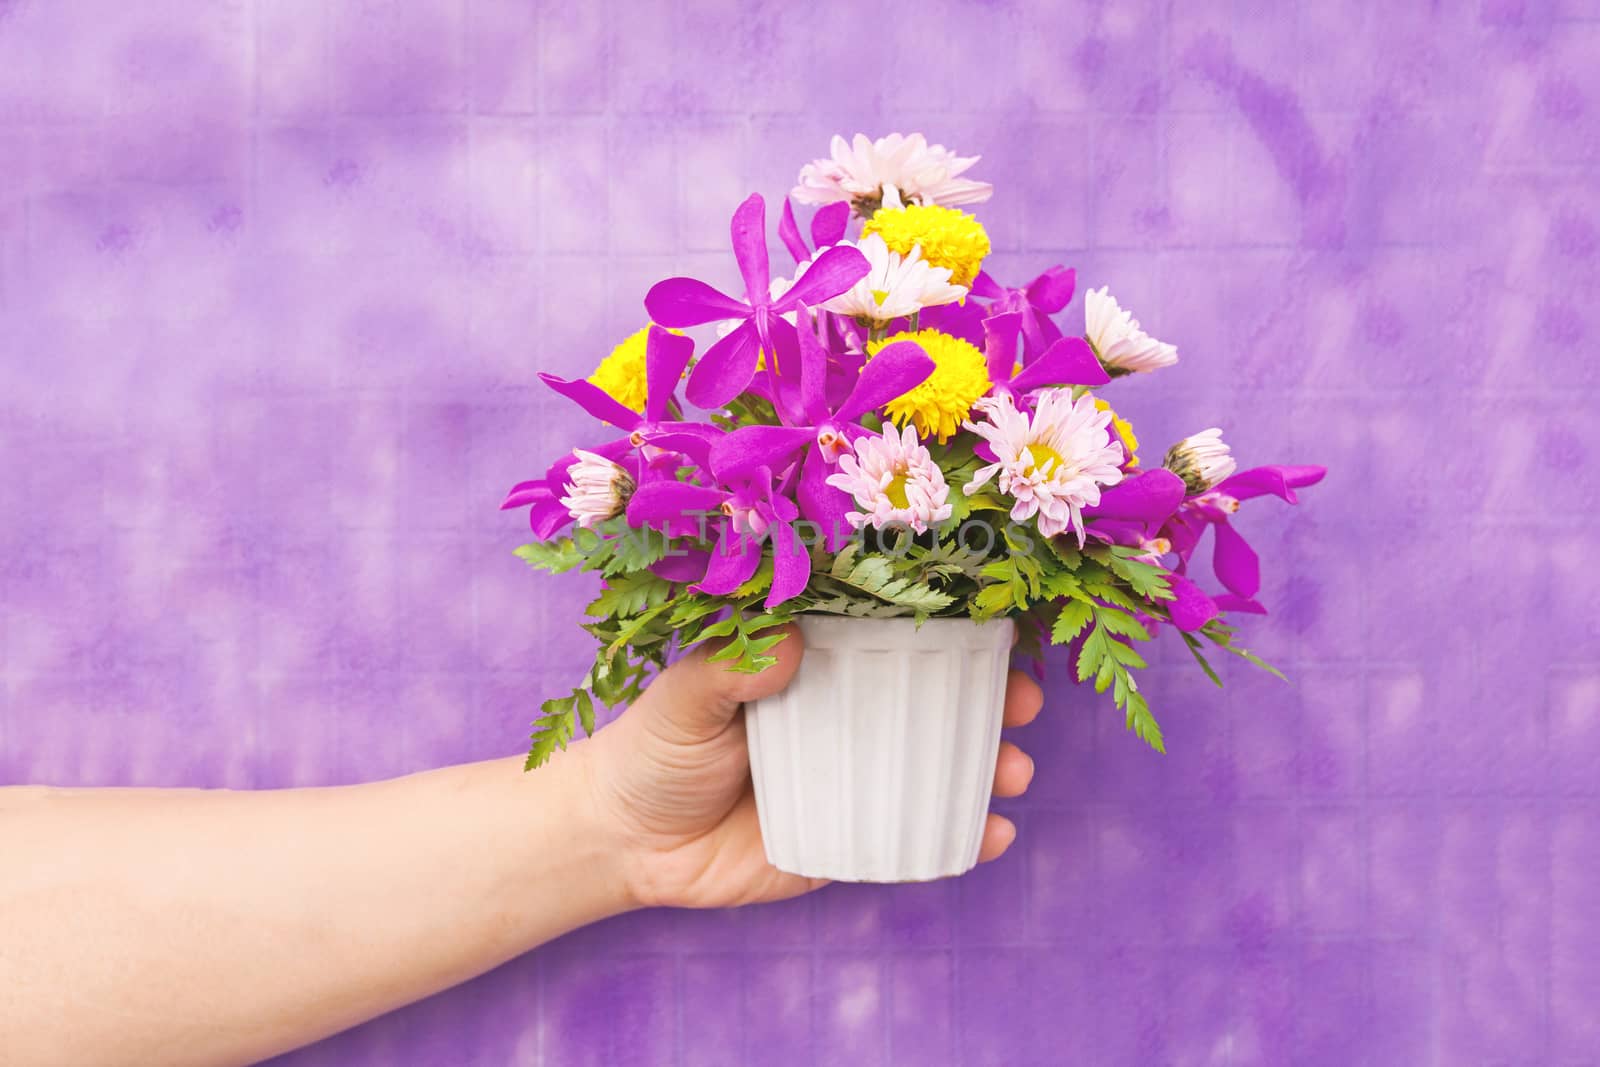 Hand holding bouquet of chrysanthemum and orchid flowers isolated on violet background.